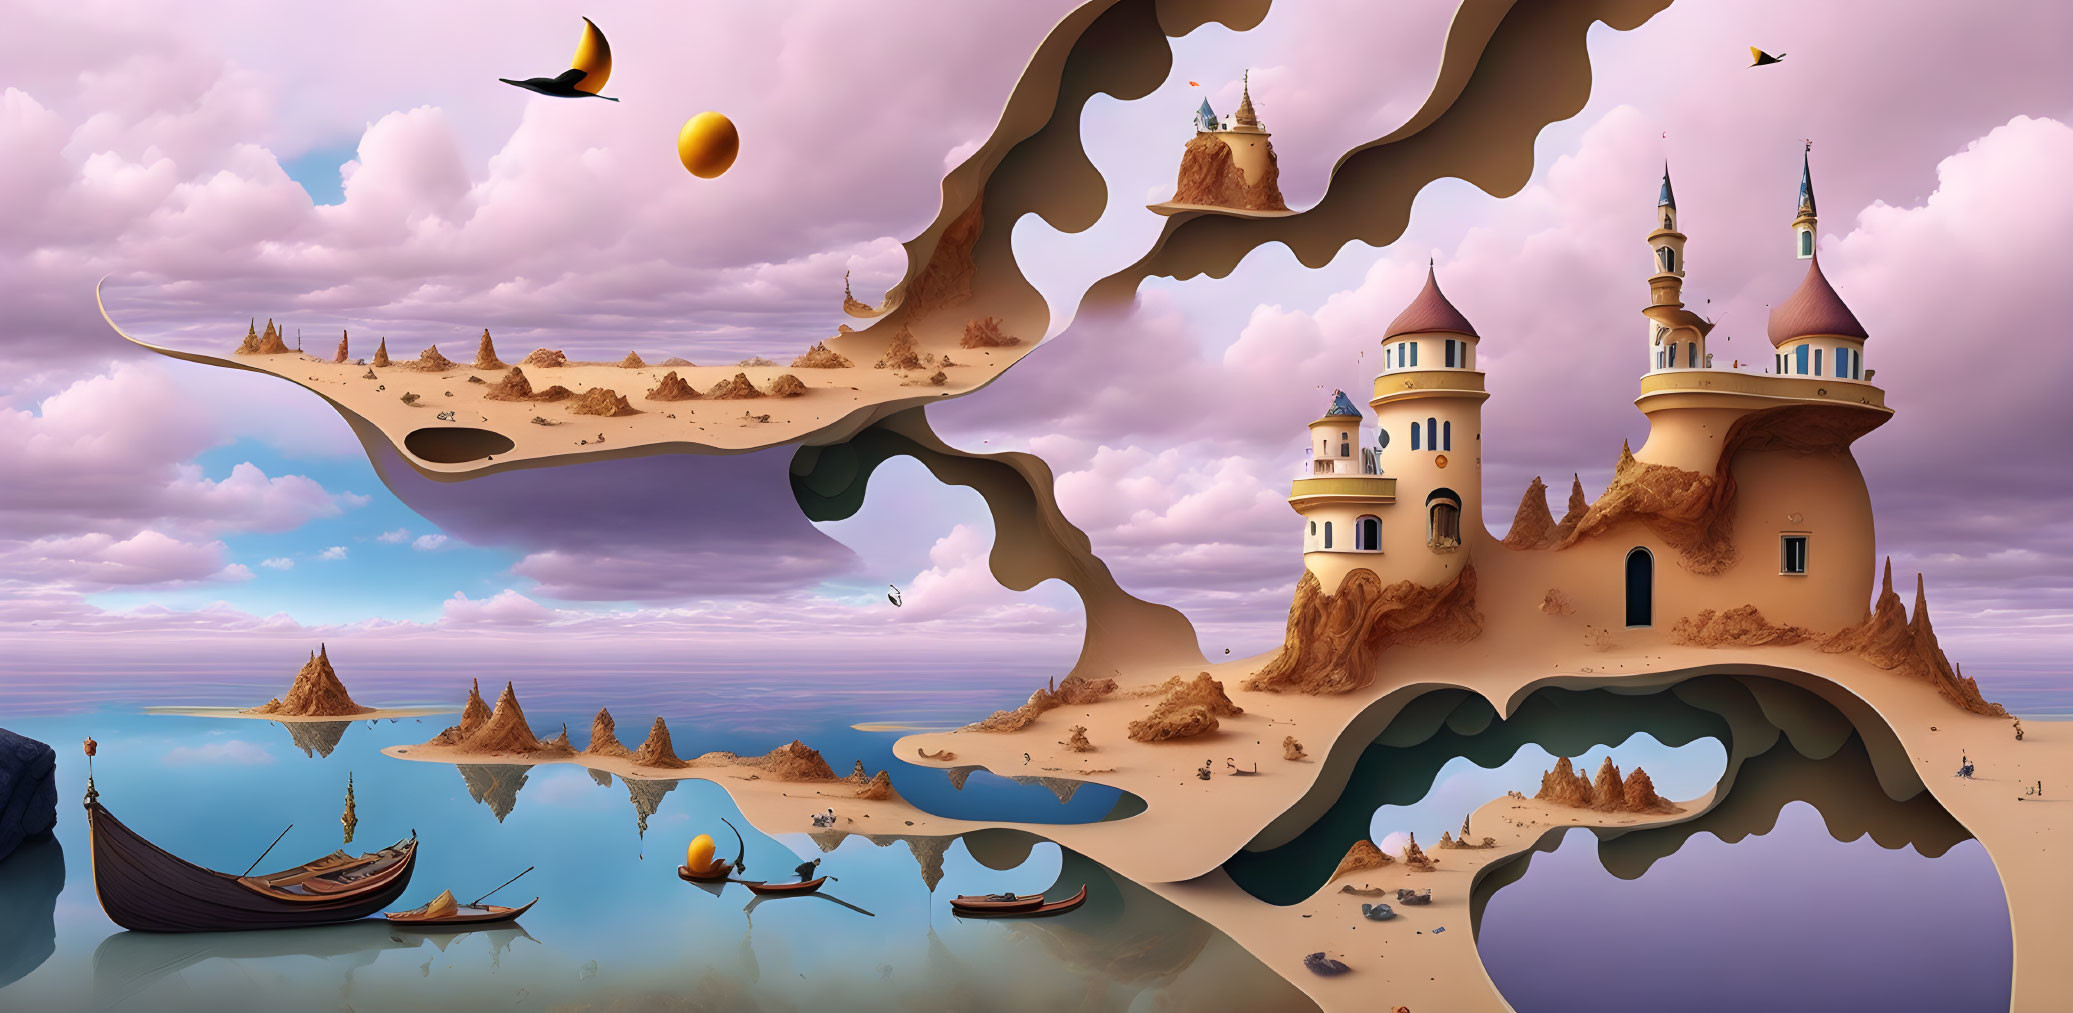 Surreal landscape with floating sandcastles, boats, and purple sky